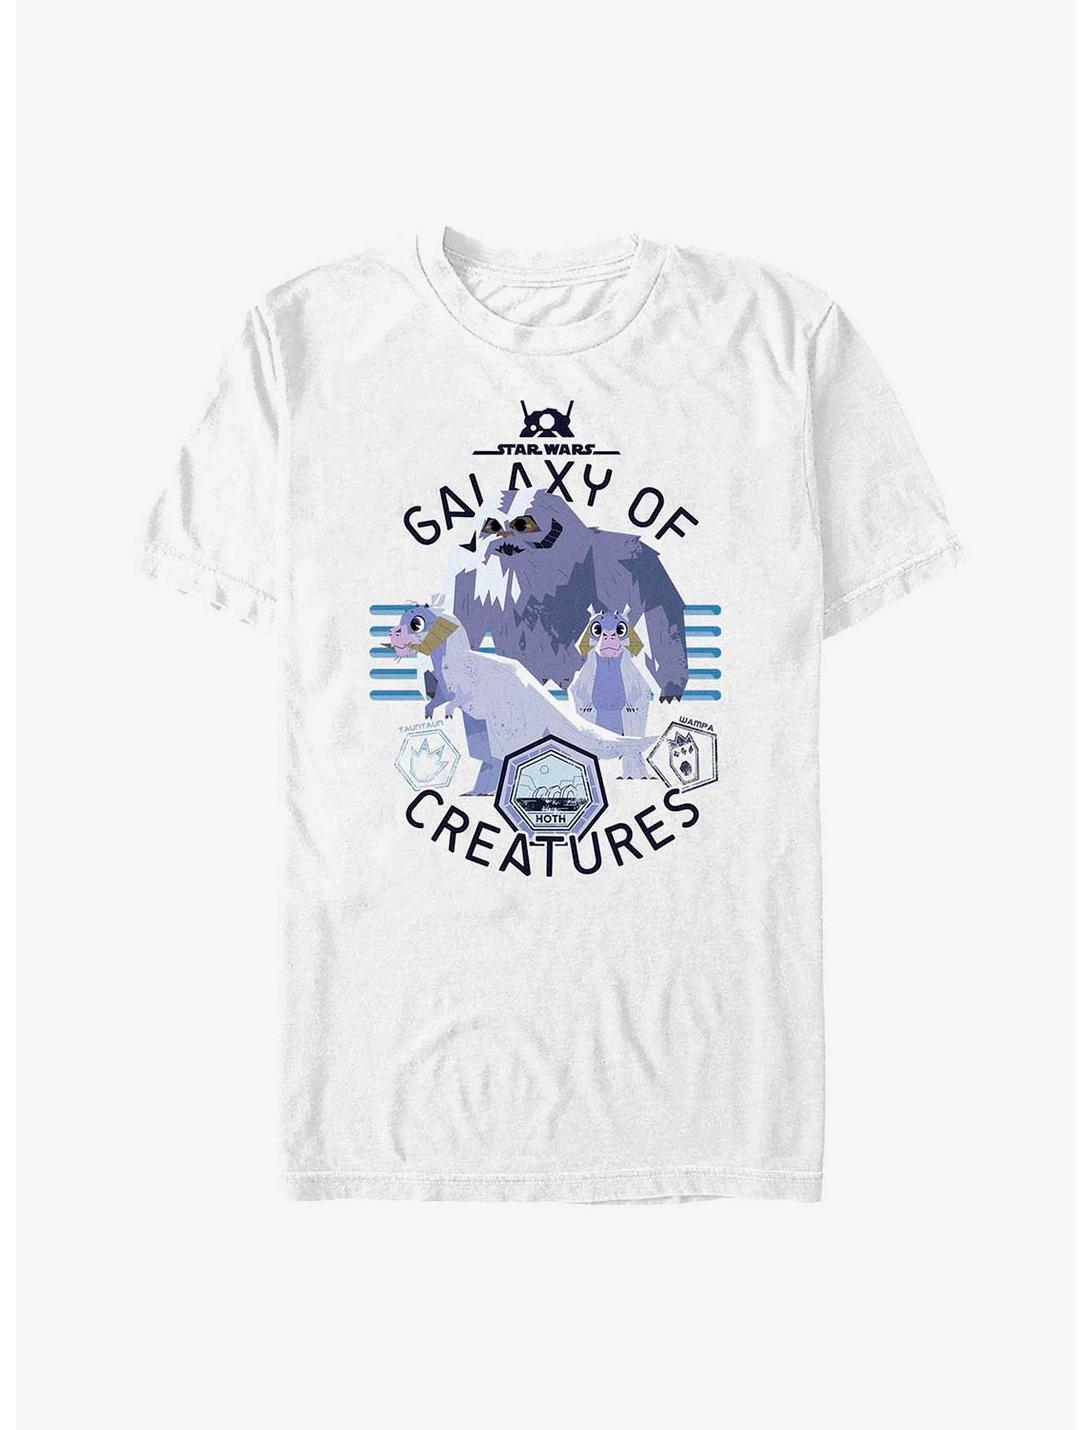 Star Wars Galaxy Of Creatures Hoth Native Species T-Shirt, WHITE, hi-res